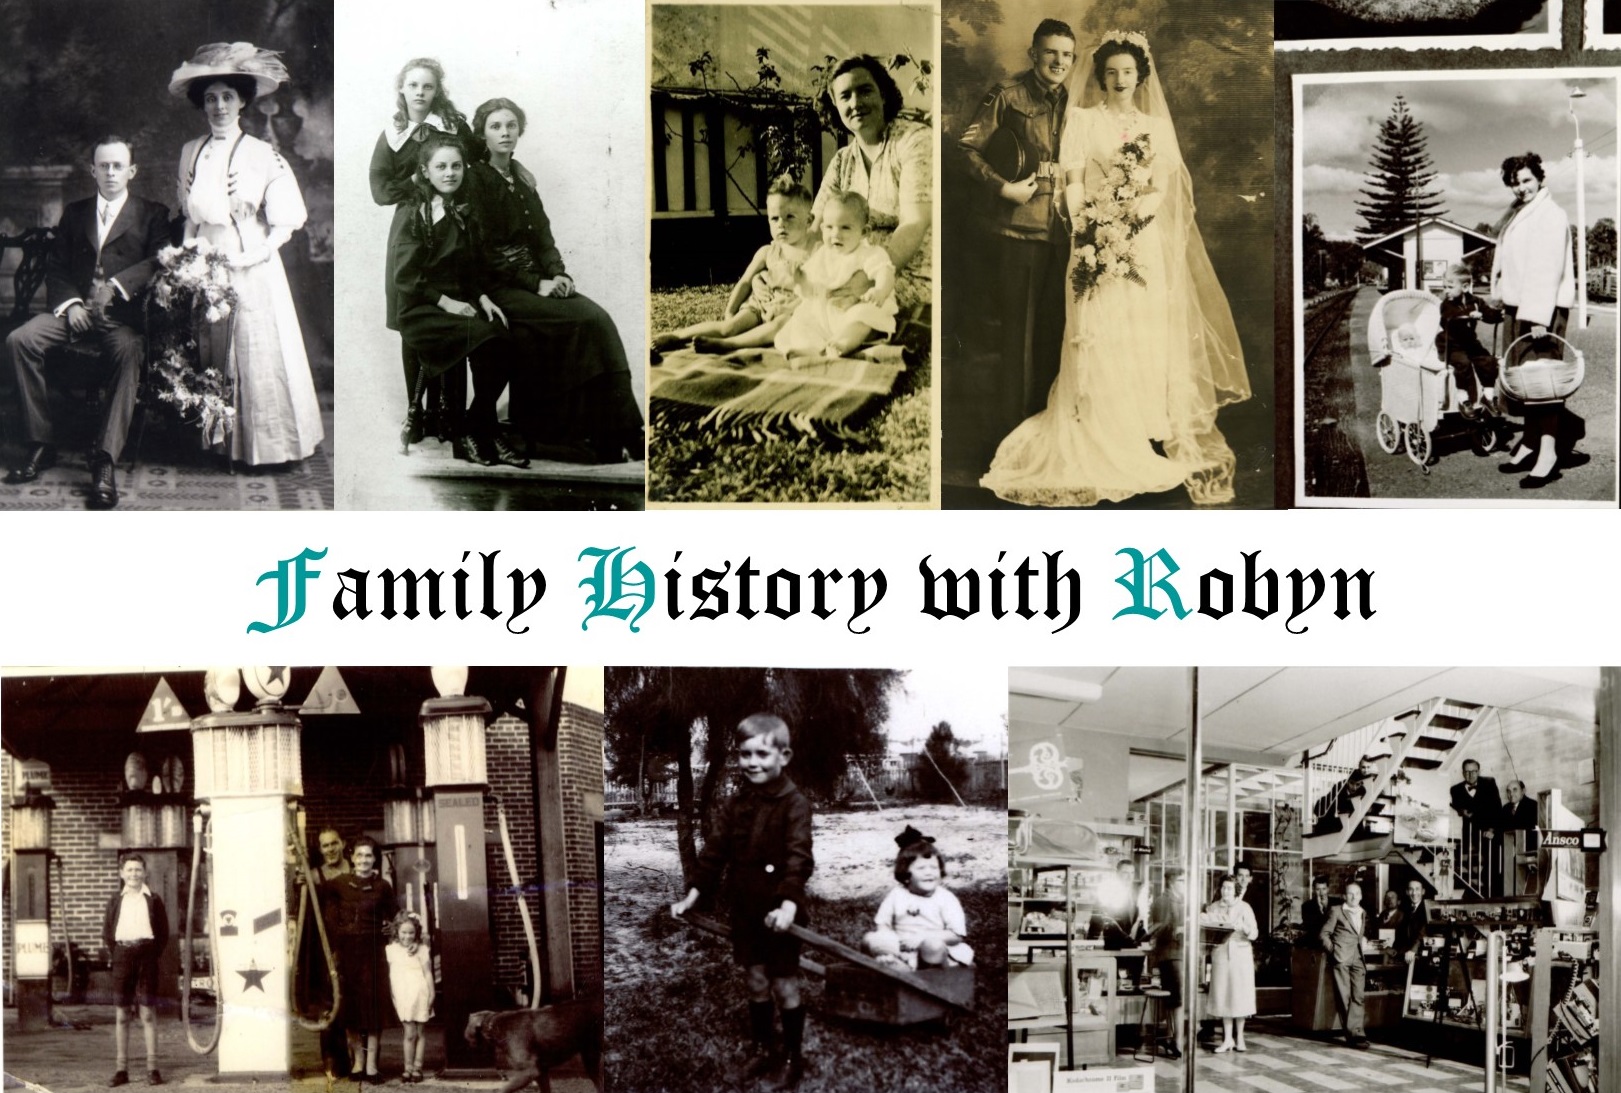 Family History with Robyn